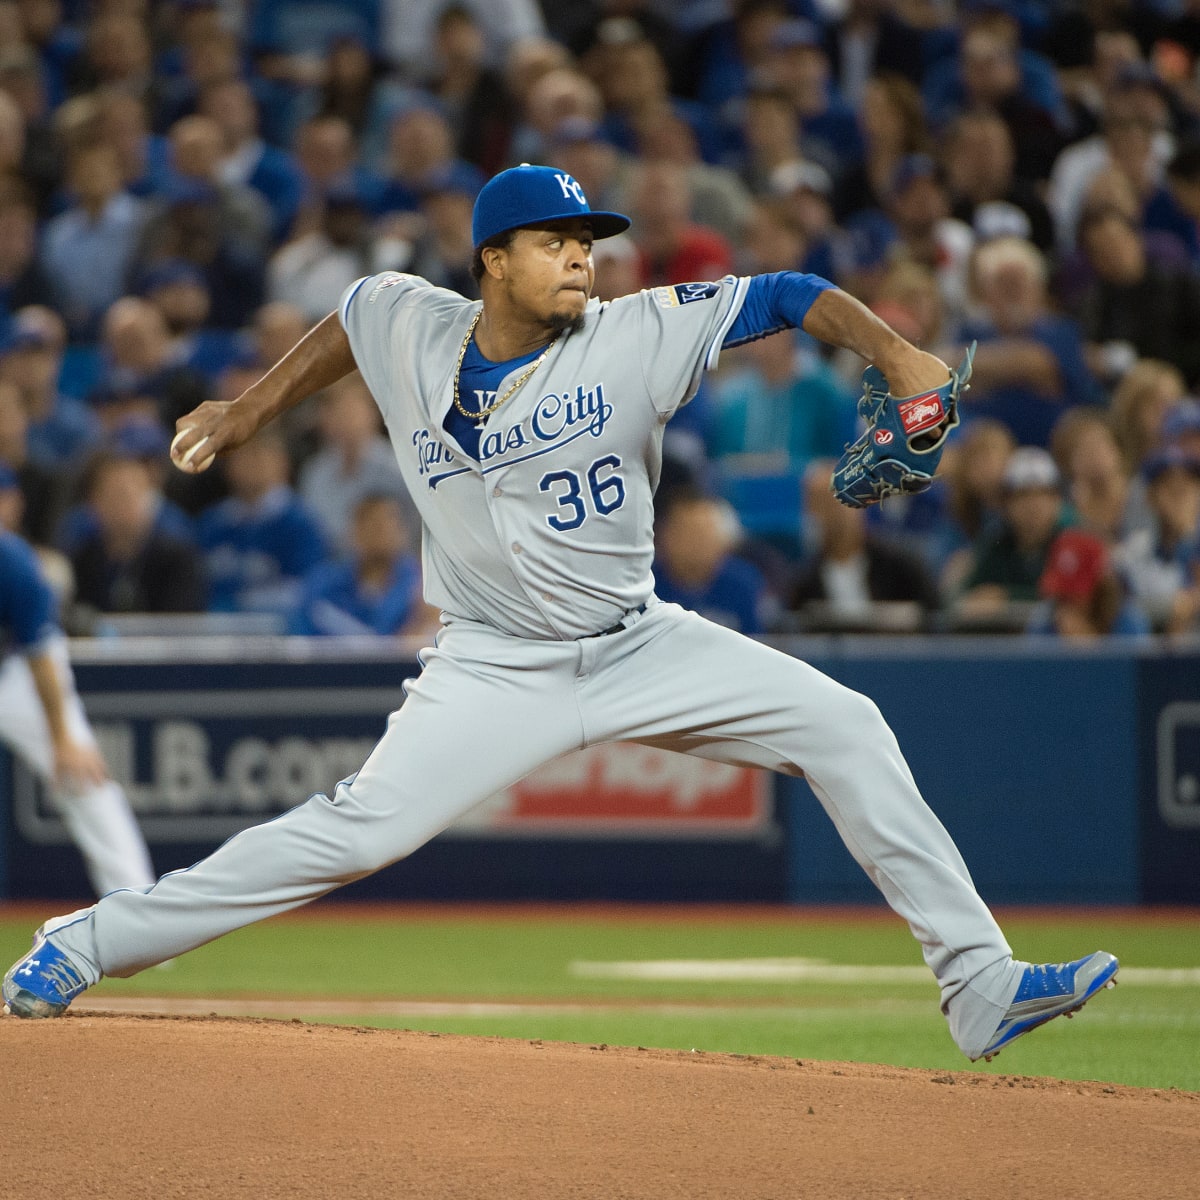 Kansas City Royals World Series roster announced - Sports Illustrated